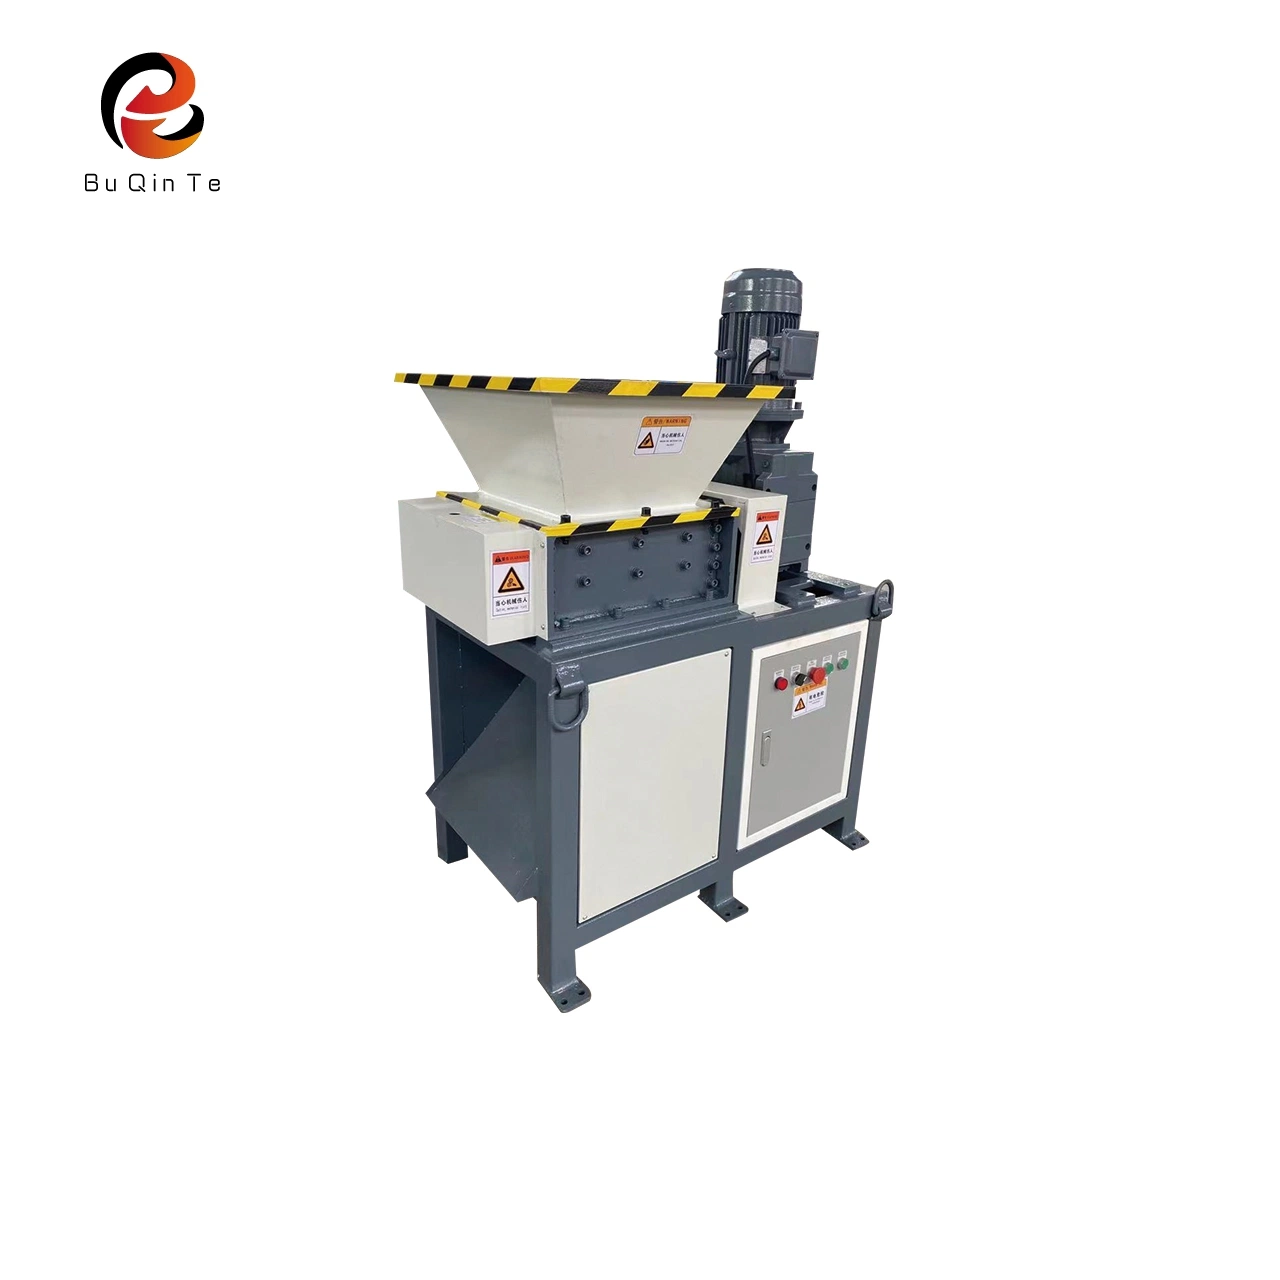 High Precision Laboratory Shredders Are Popular Products